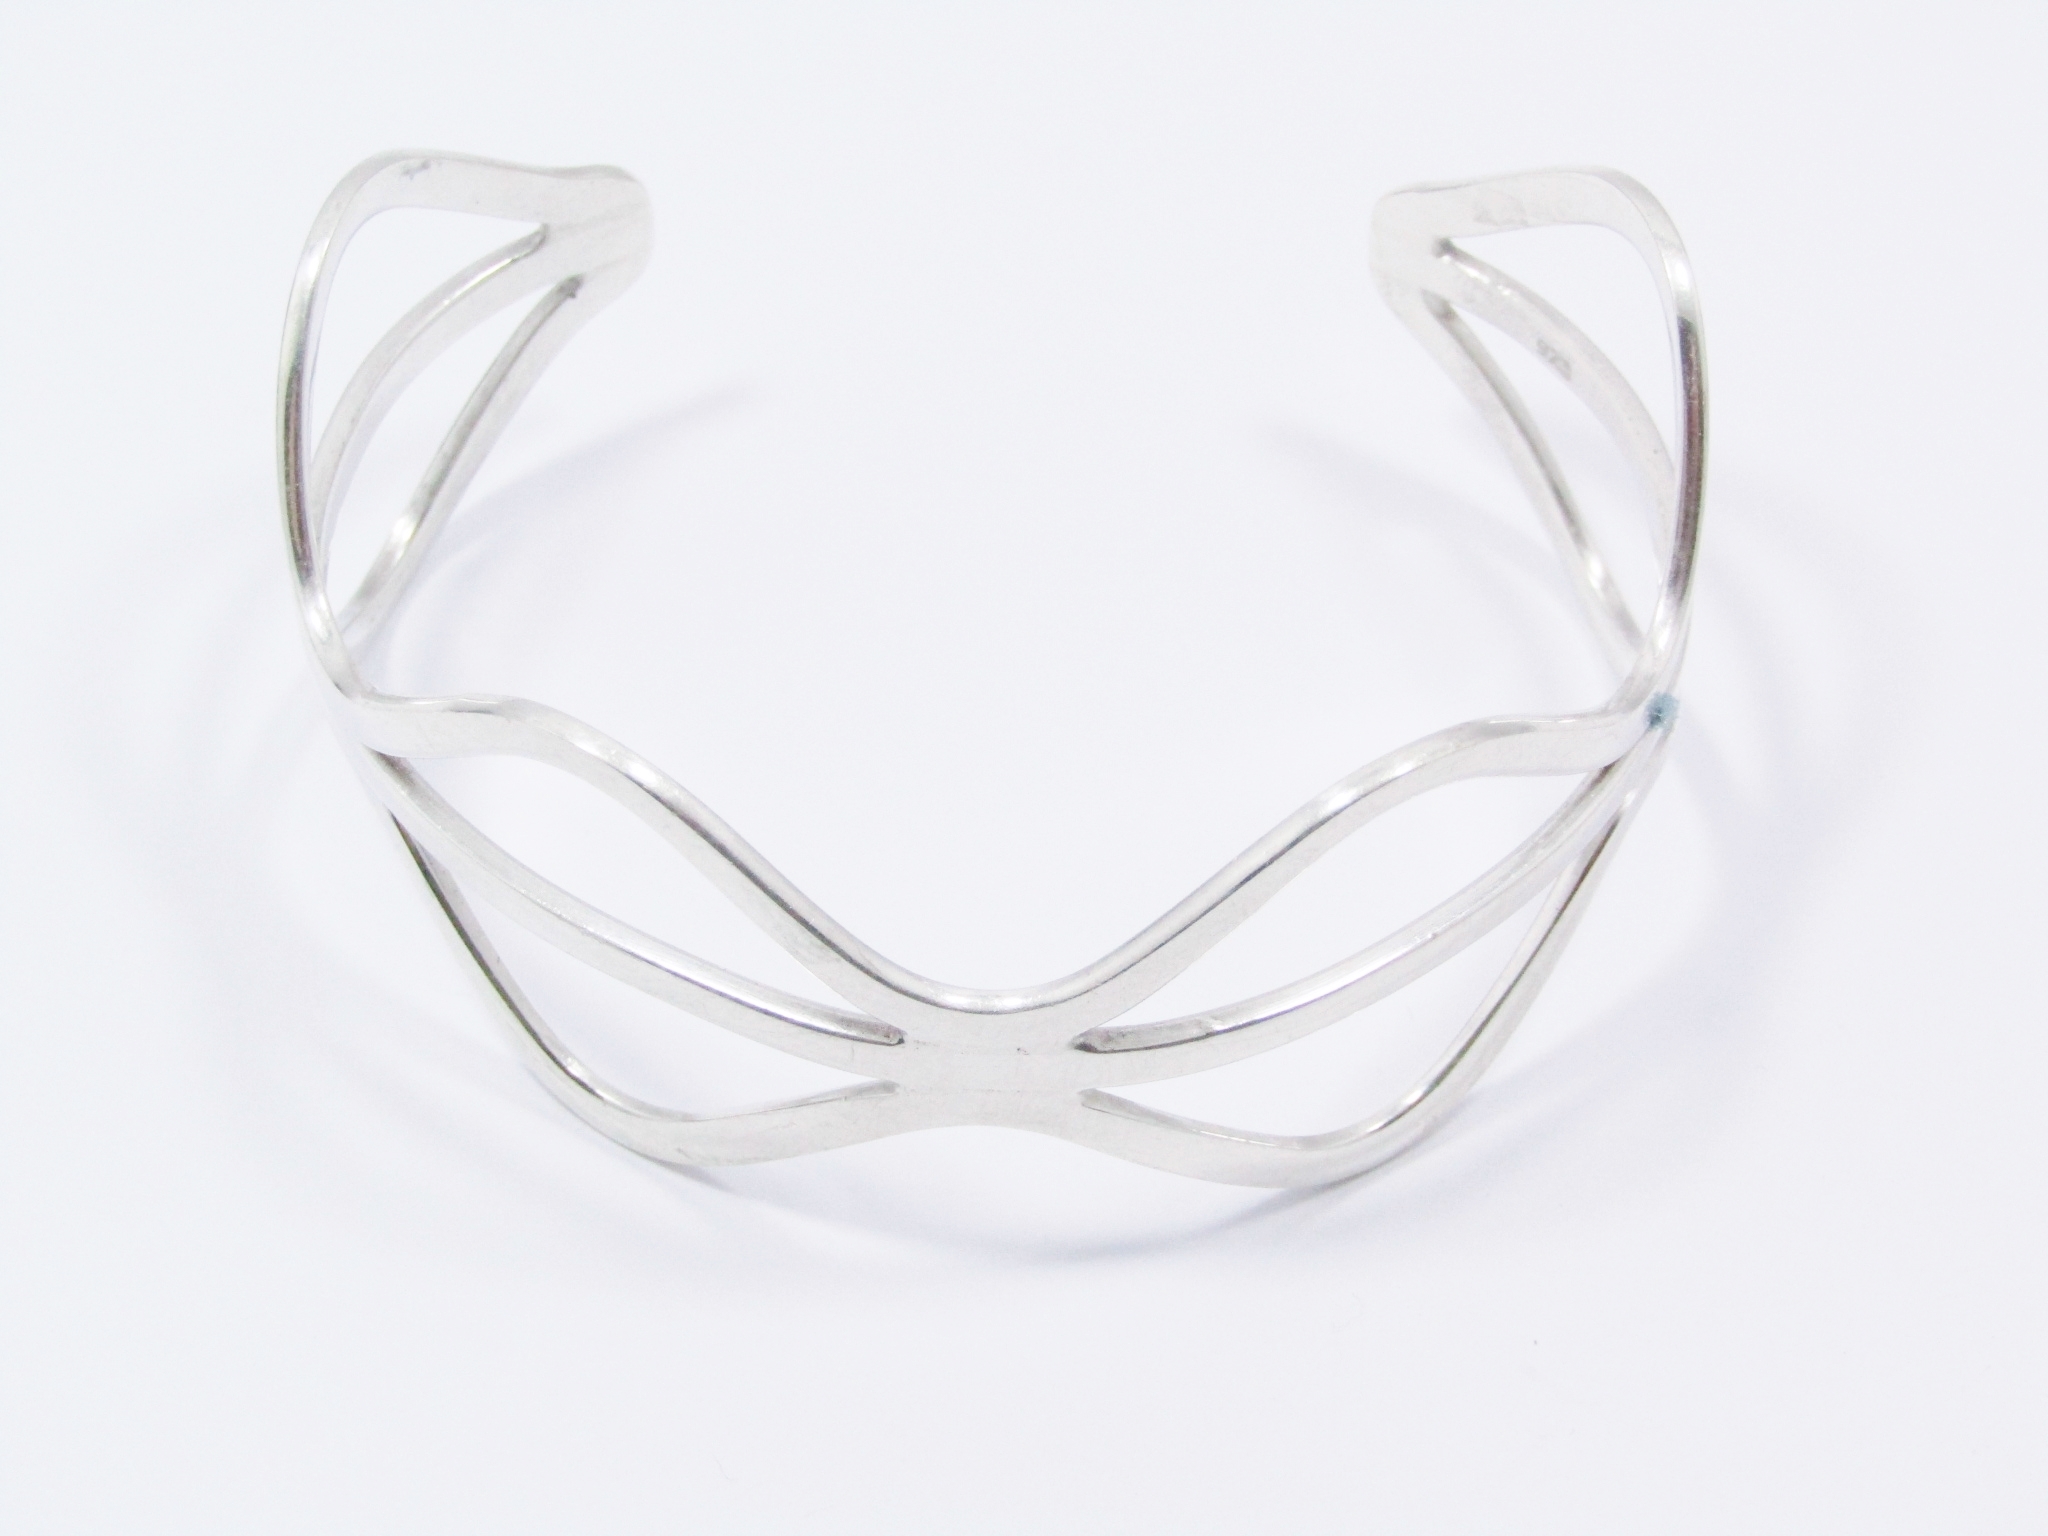 A Lovely Broad Fancy Design Cuff Bangle in Sterling Silver.